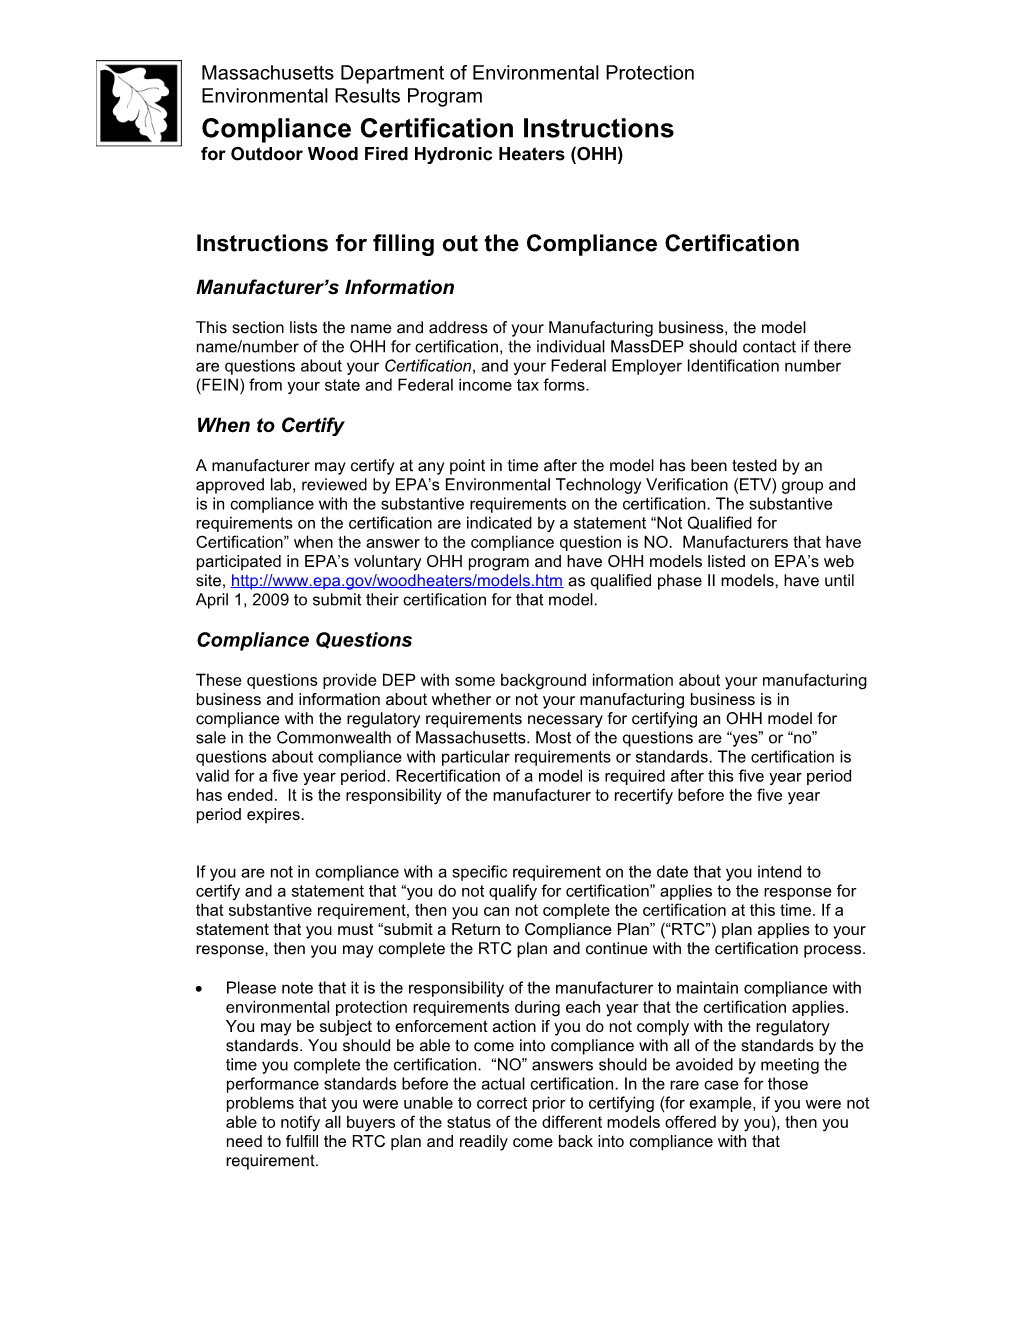 Instructions for Filling out the Compliance Certification